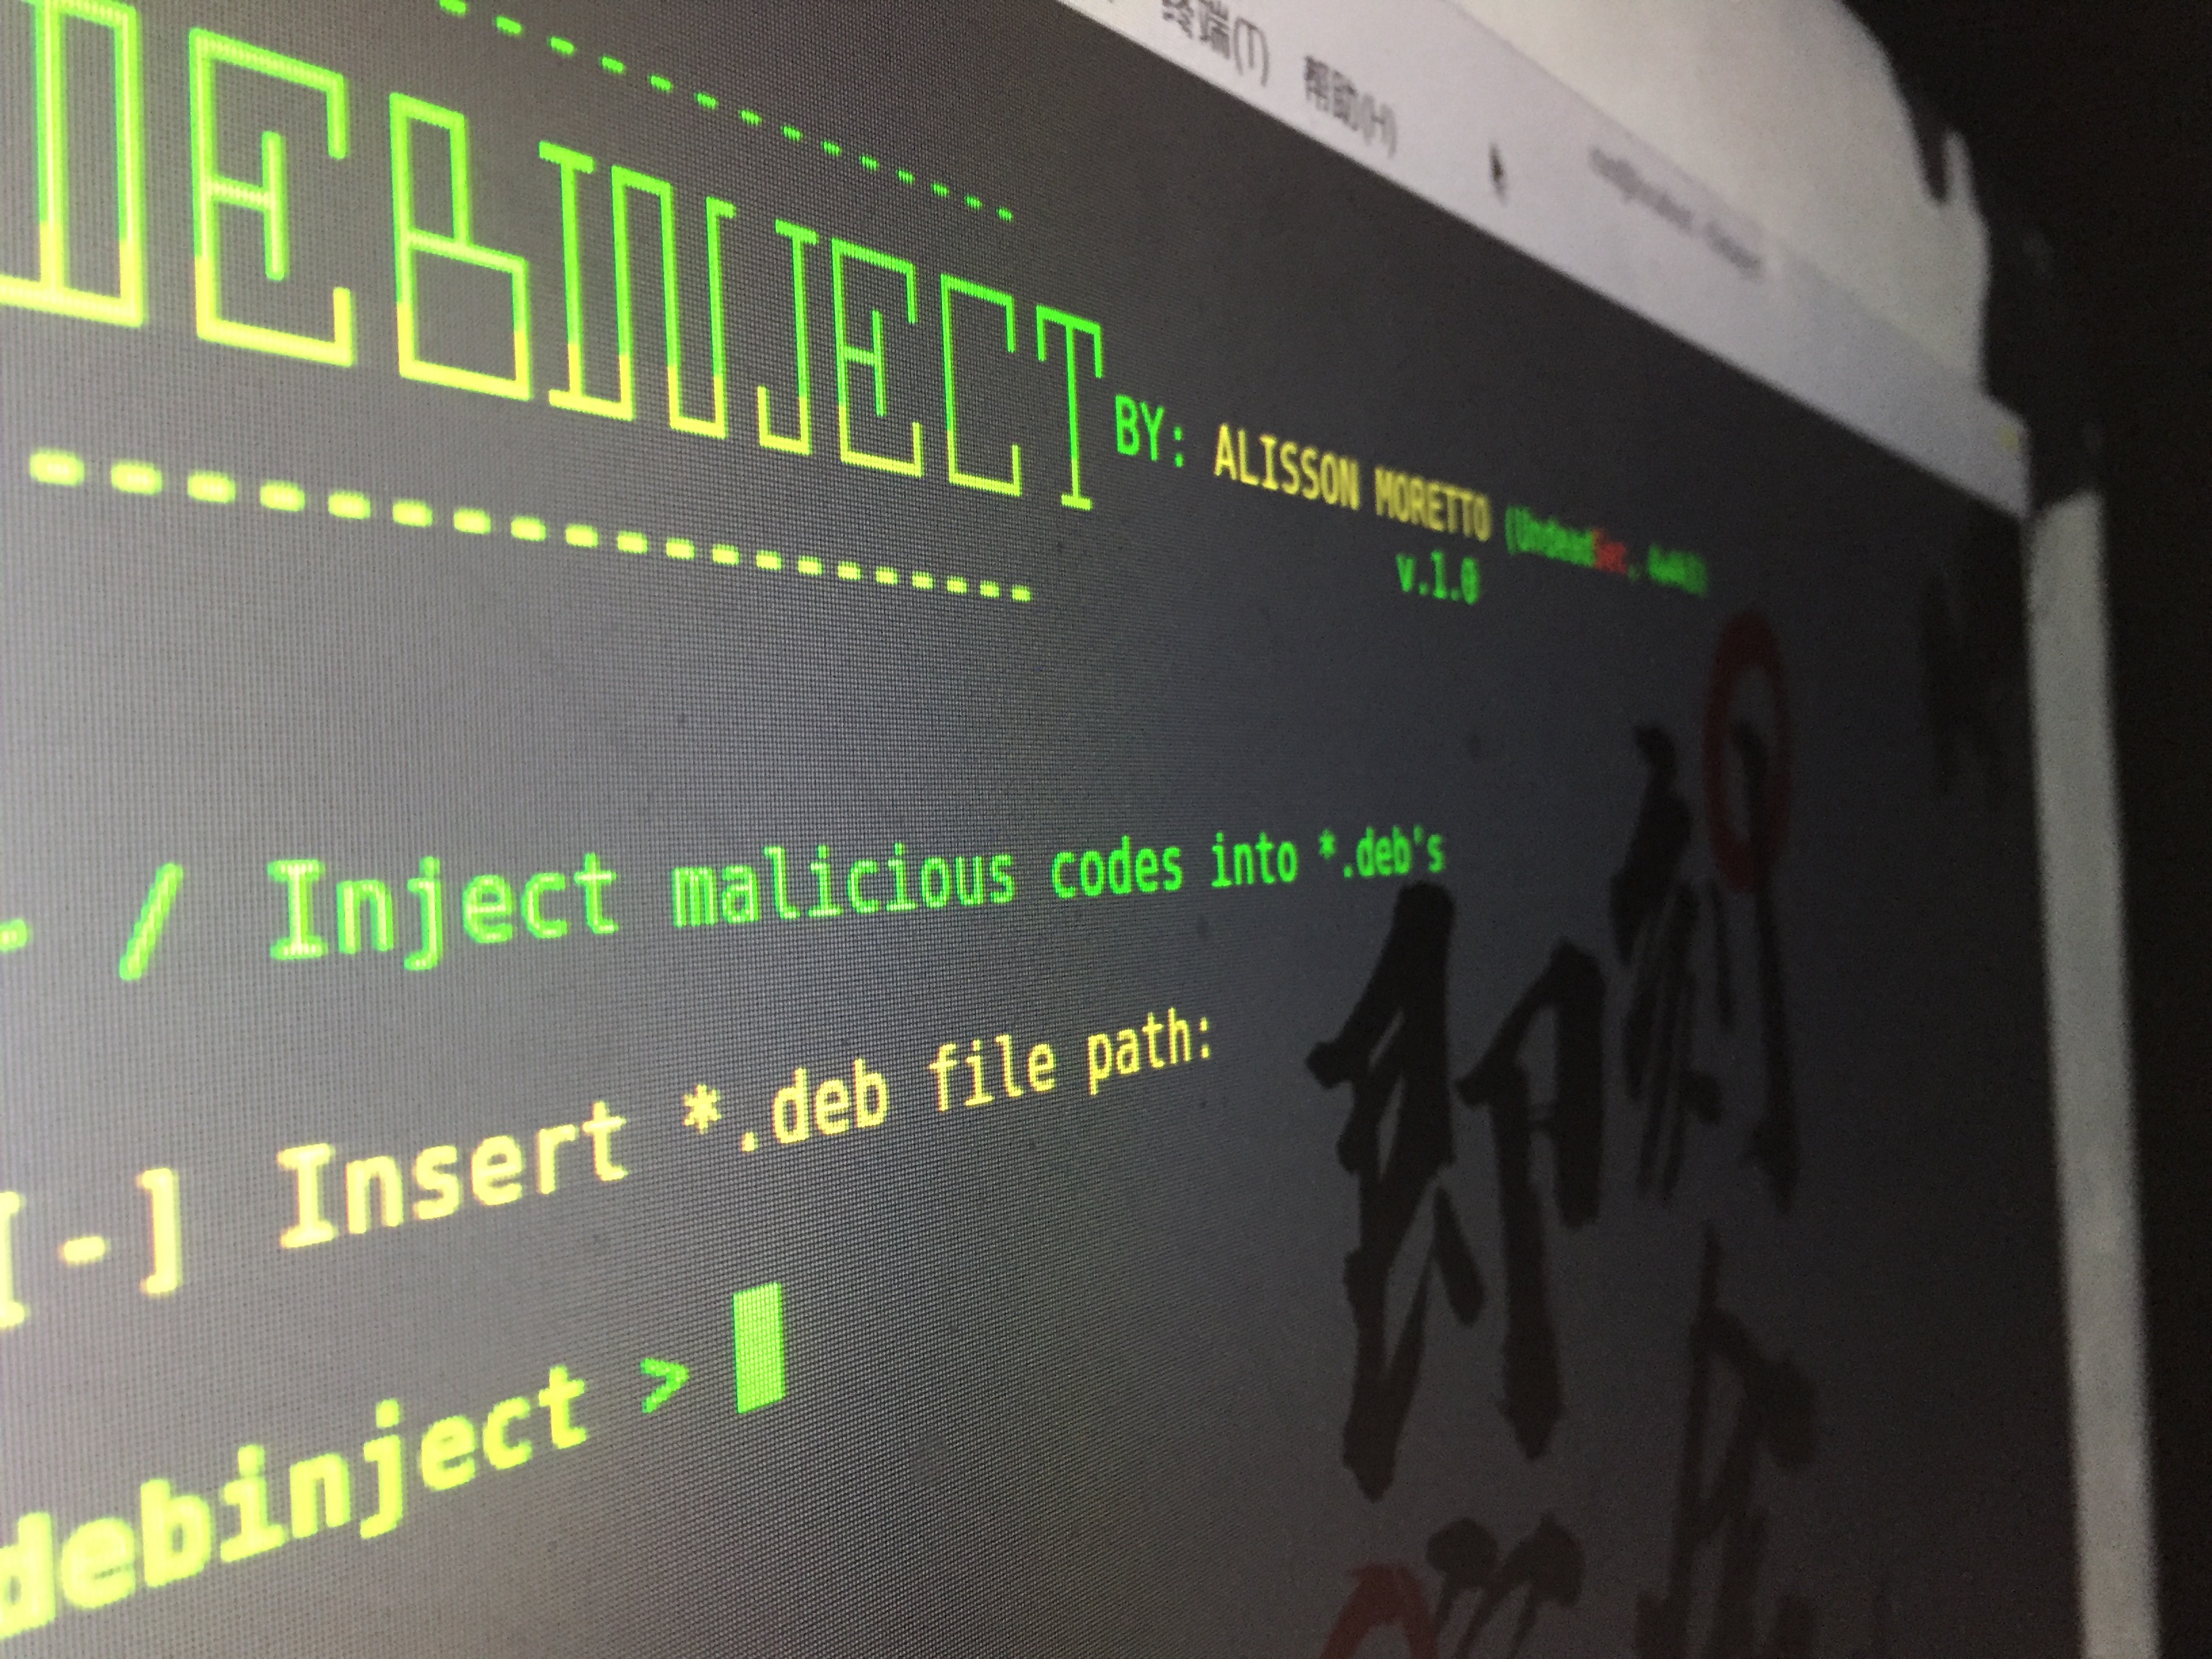 Debinject--Hacking funny for linux